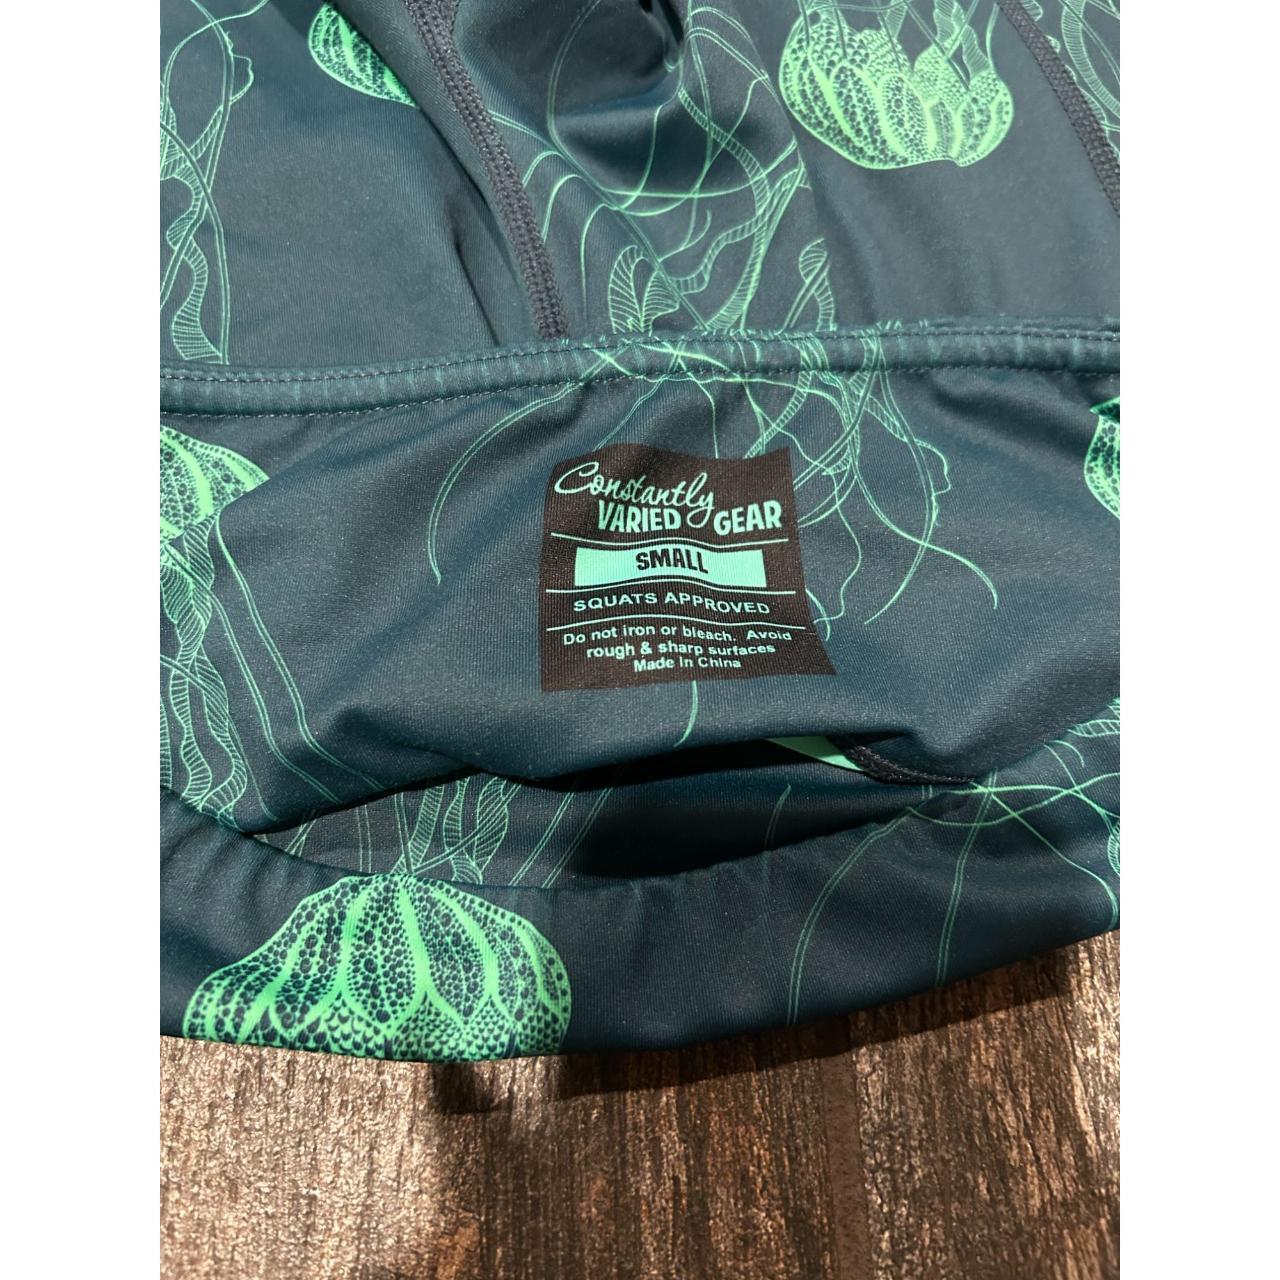 GENTLY USED CONSTANTLY VARIED GEAR JELLYFISH - Depop